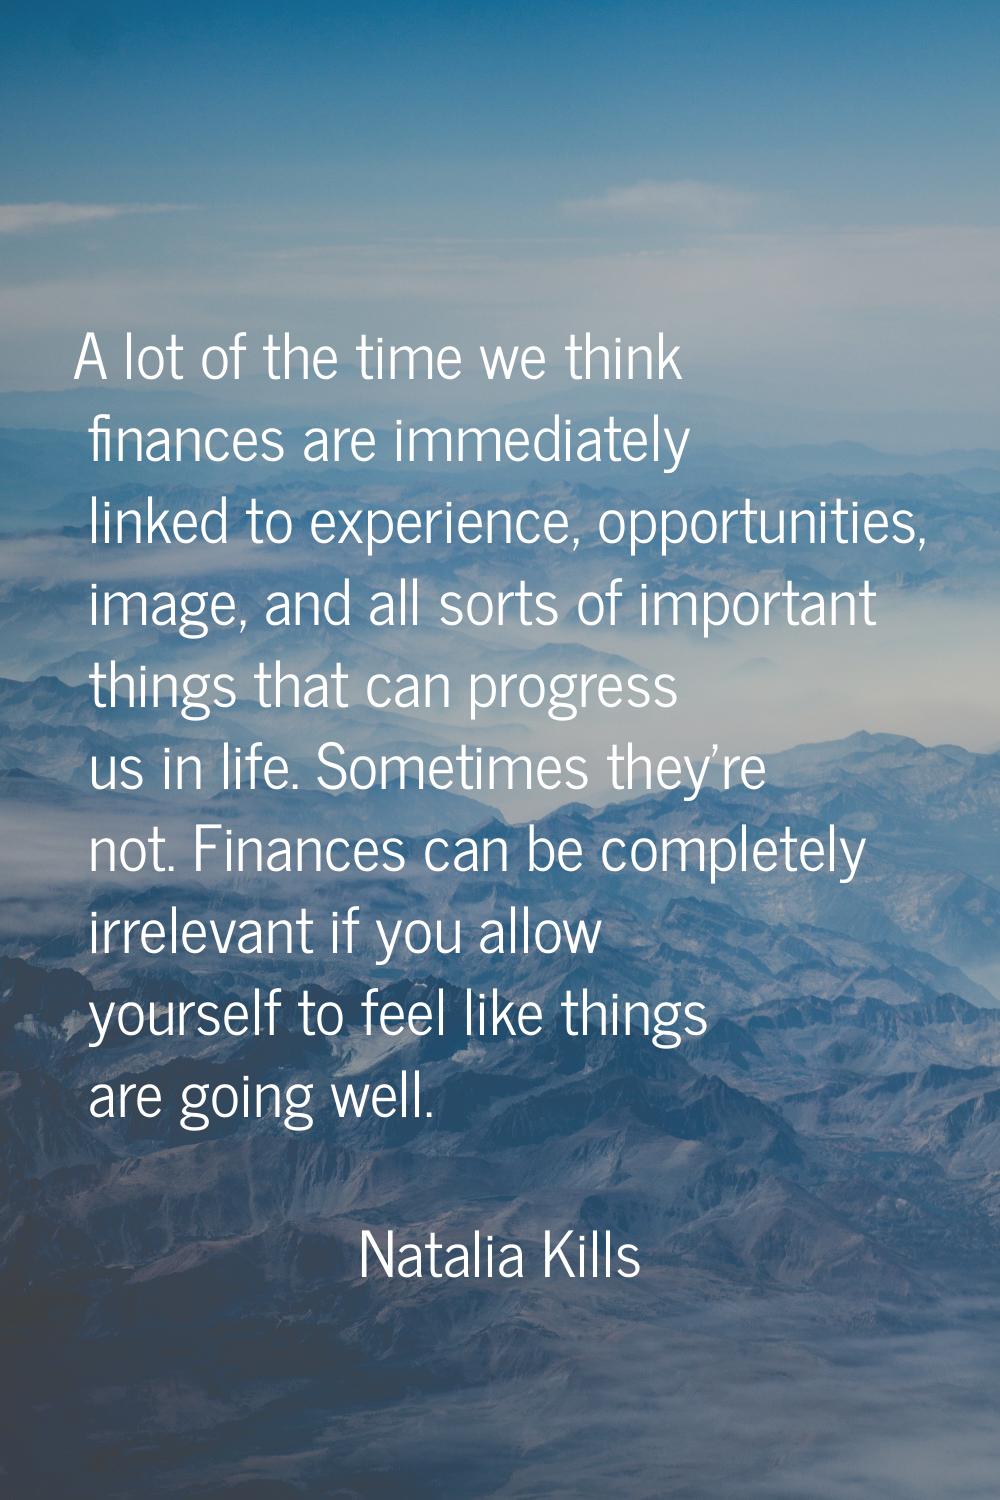 A lot of the time we think finances are immediately linked to experience, opportunities, image, and